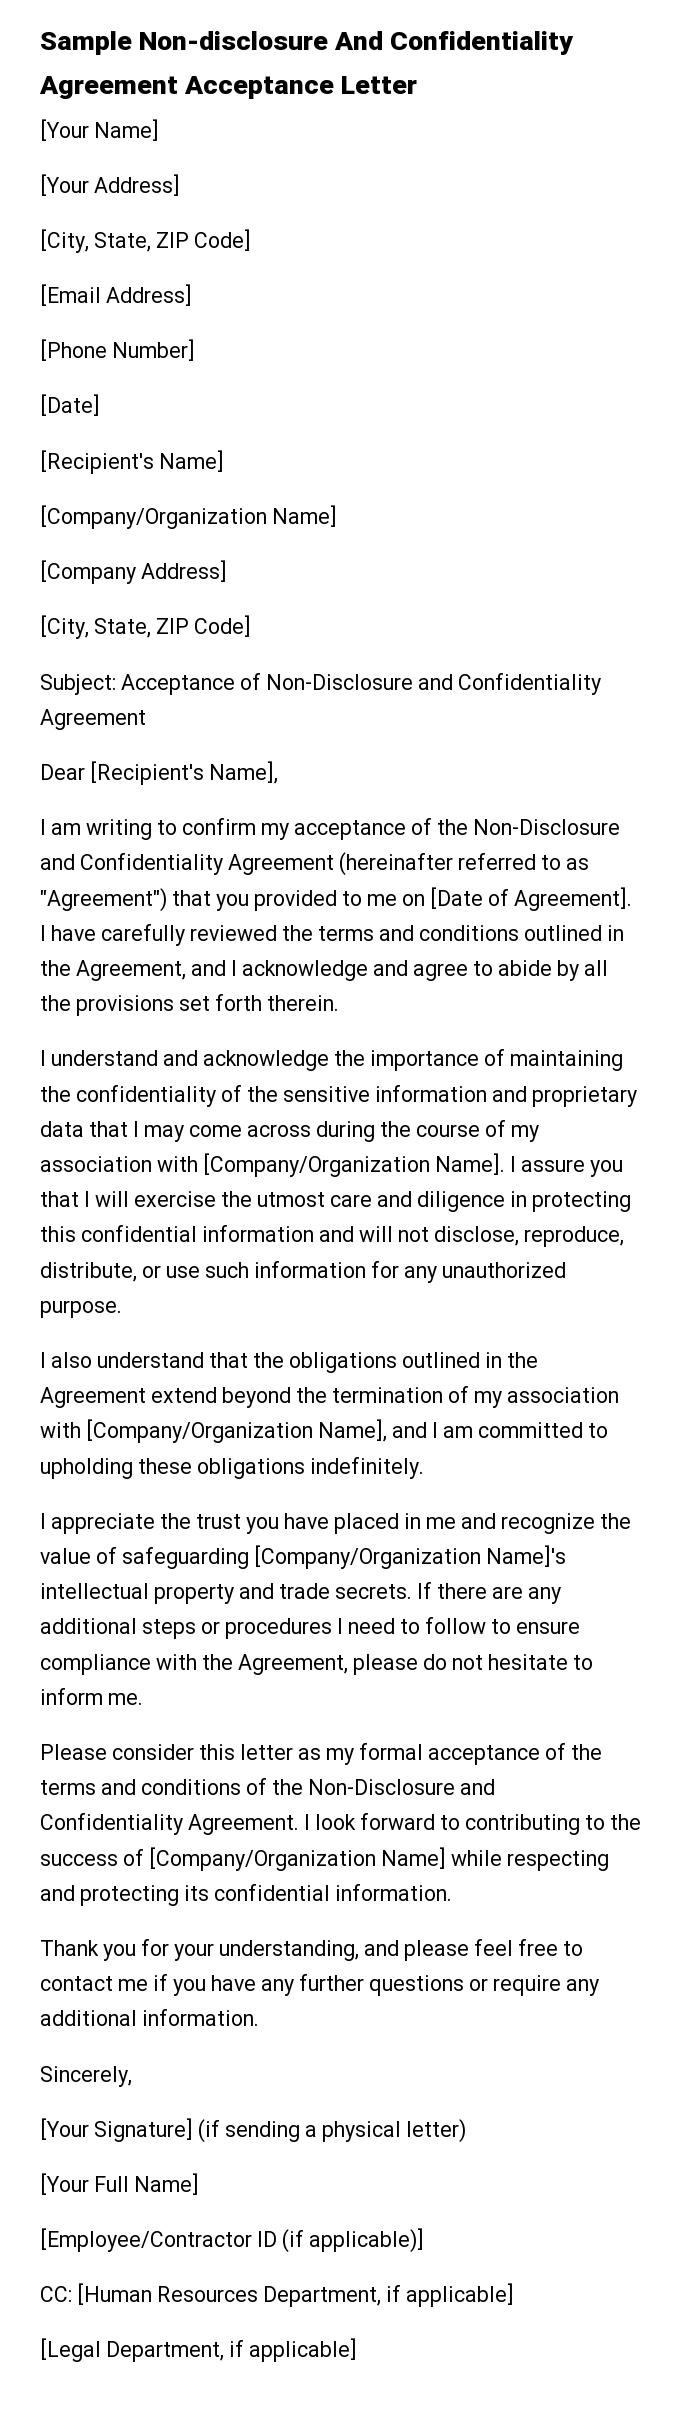 Sample Non-disclosure And Confidentiality Agreement Acceptance Letter